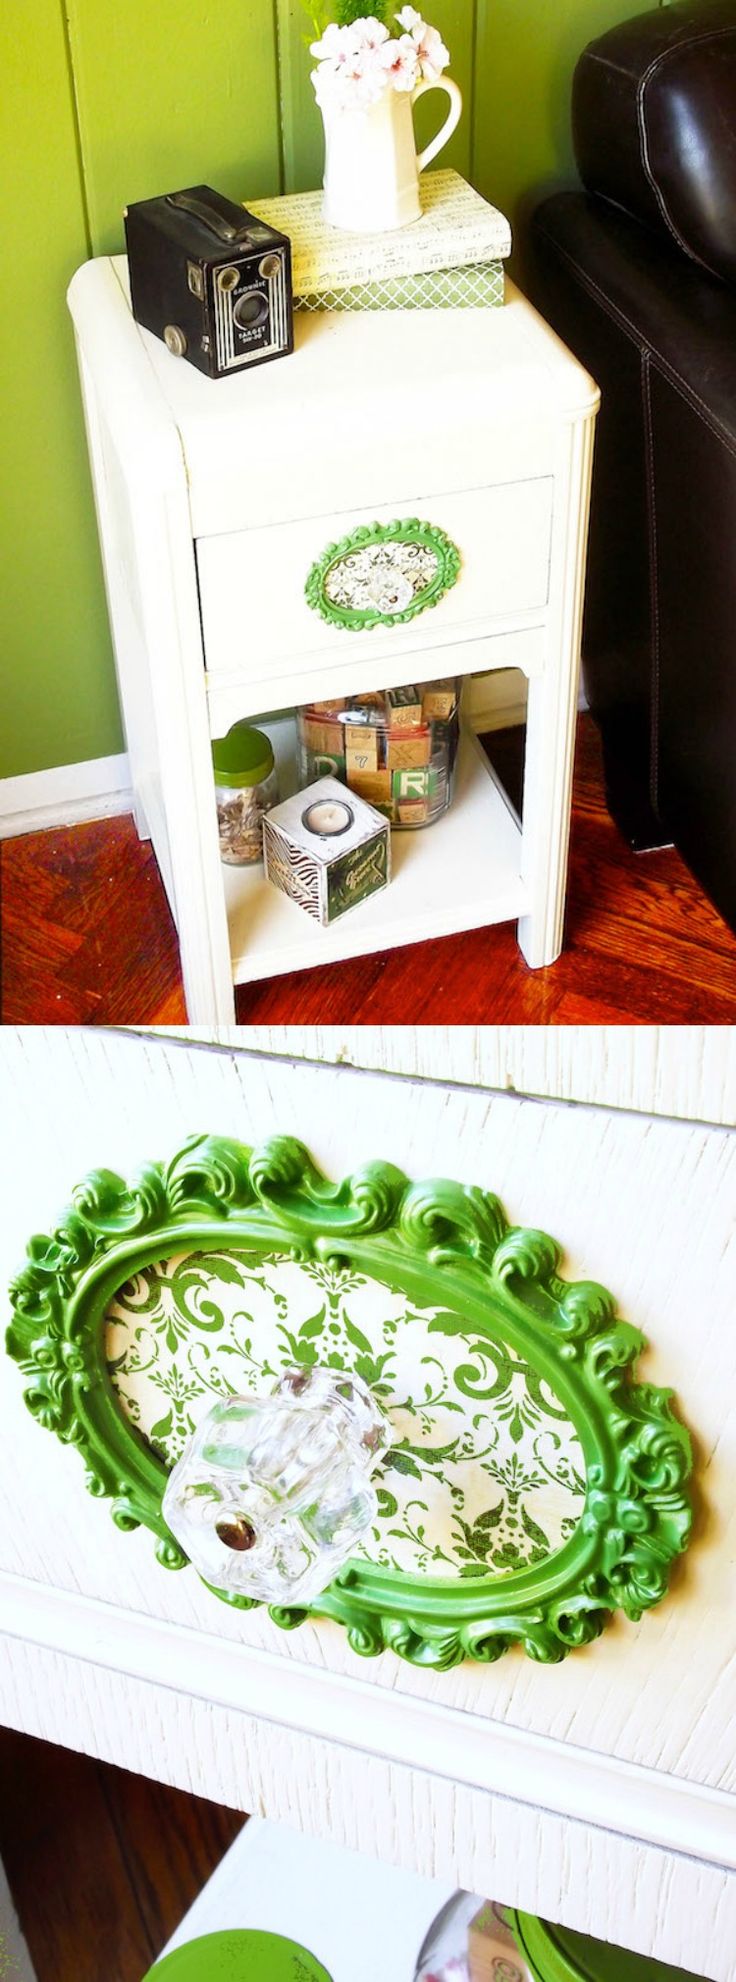 Simple Side Table Makeover - Add a Pop of Color